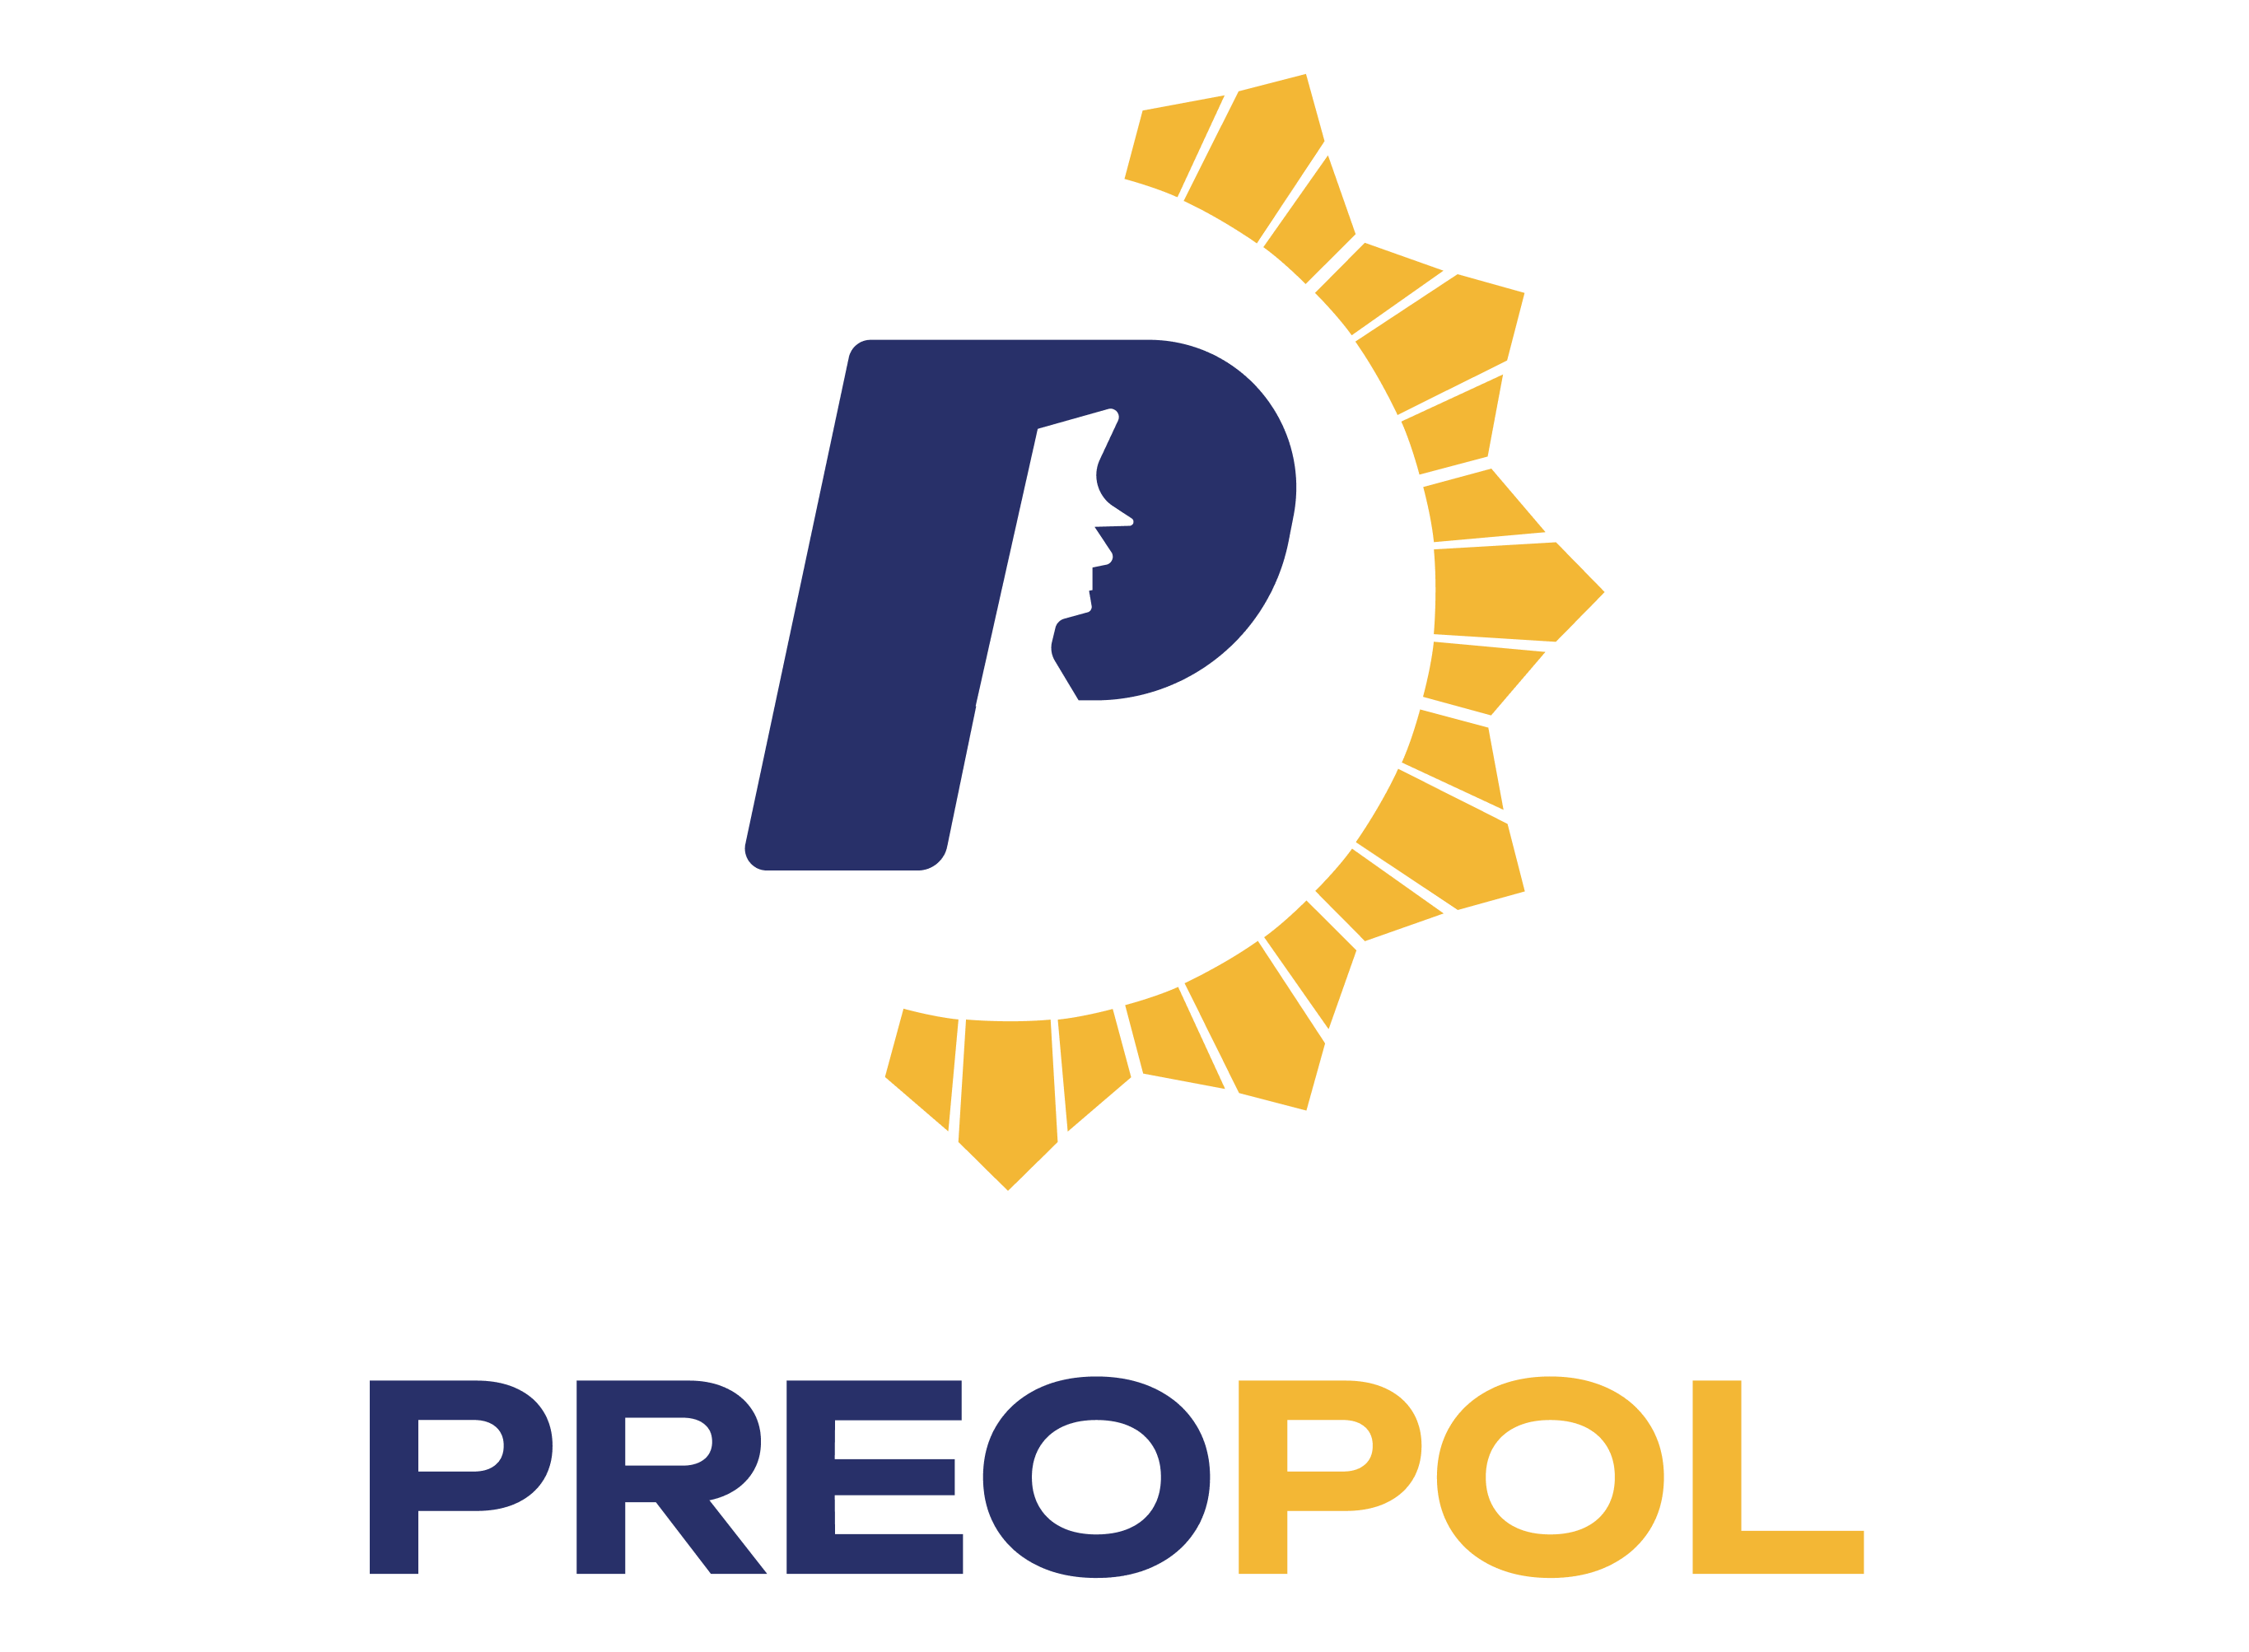 Preopol